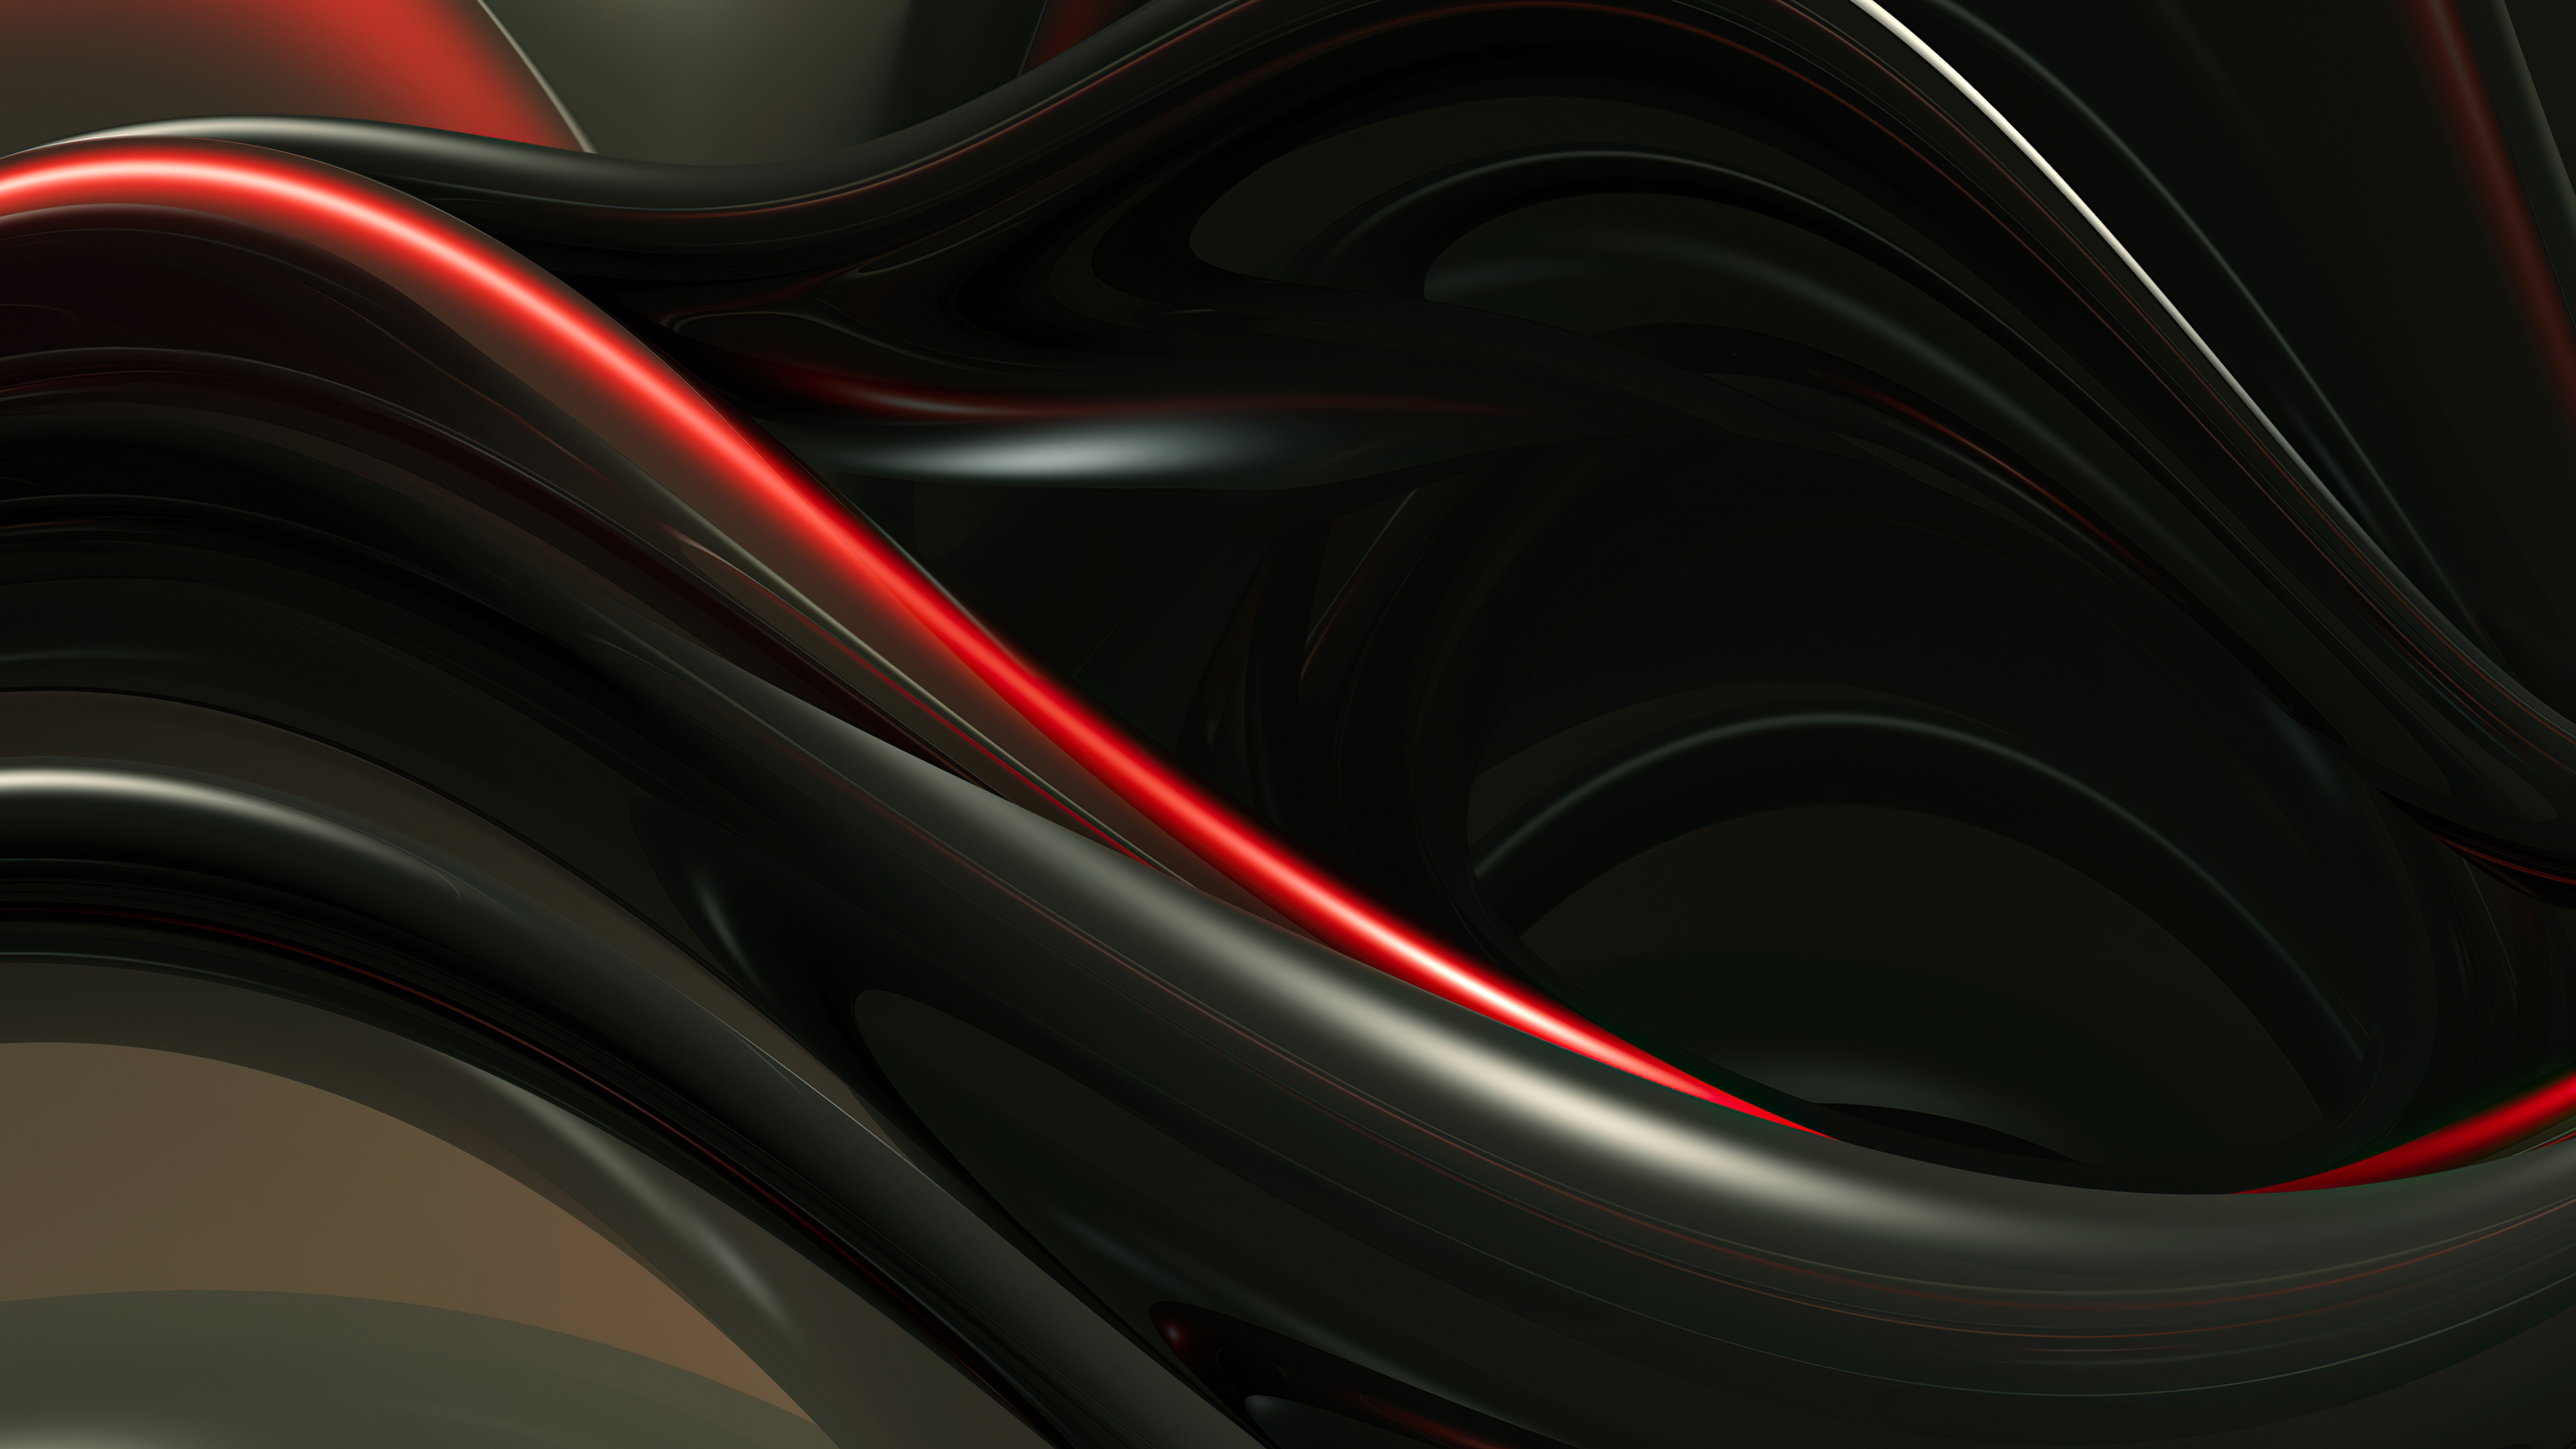 Abstract Swirly 3D Render 3D Abstract 3840x2160